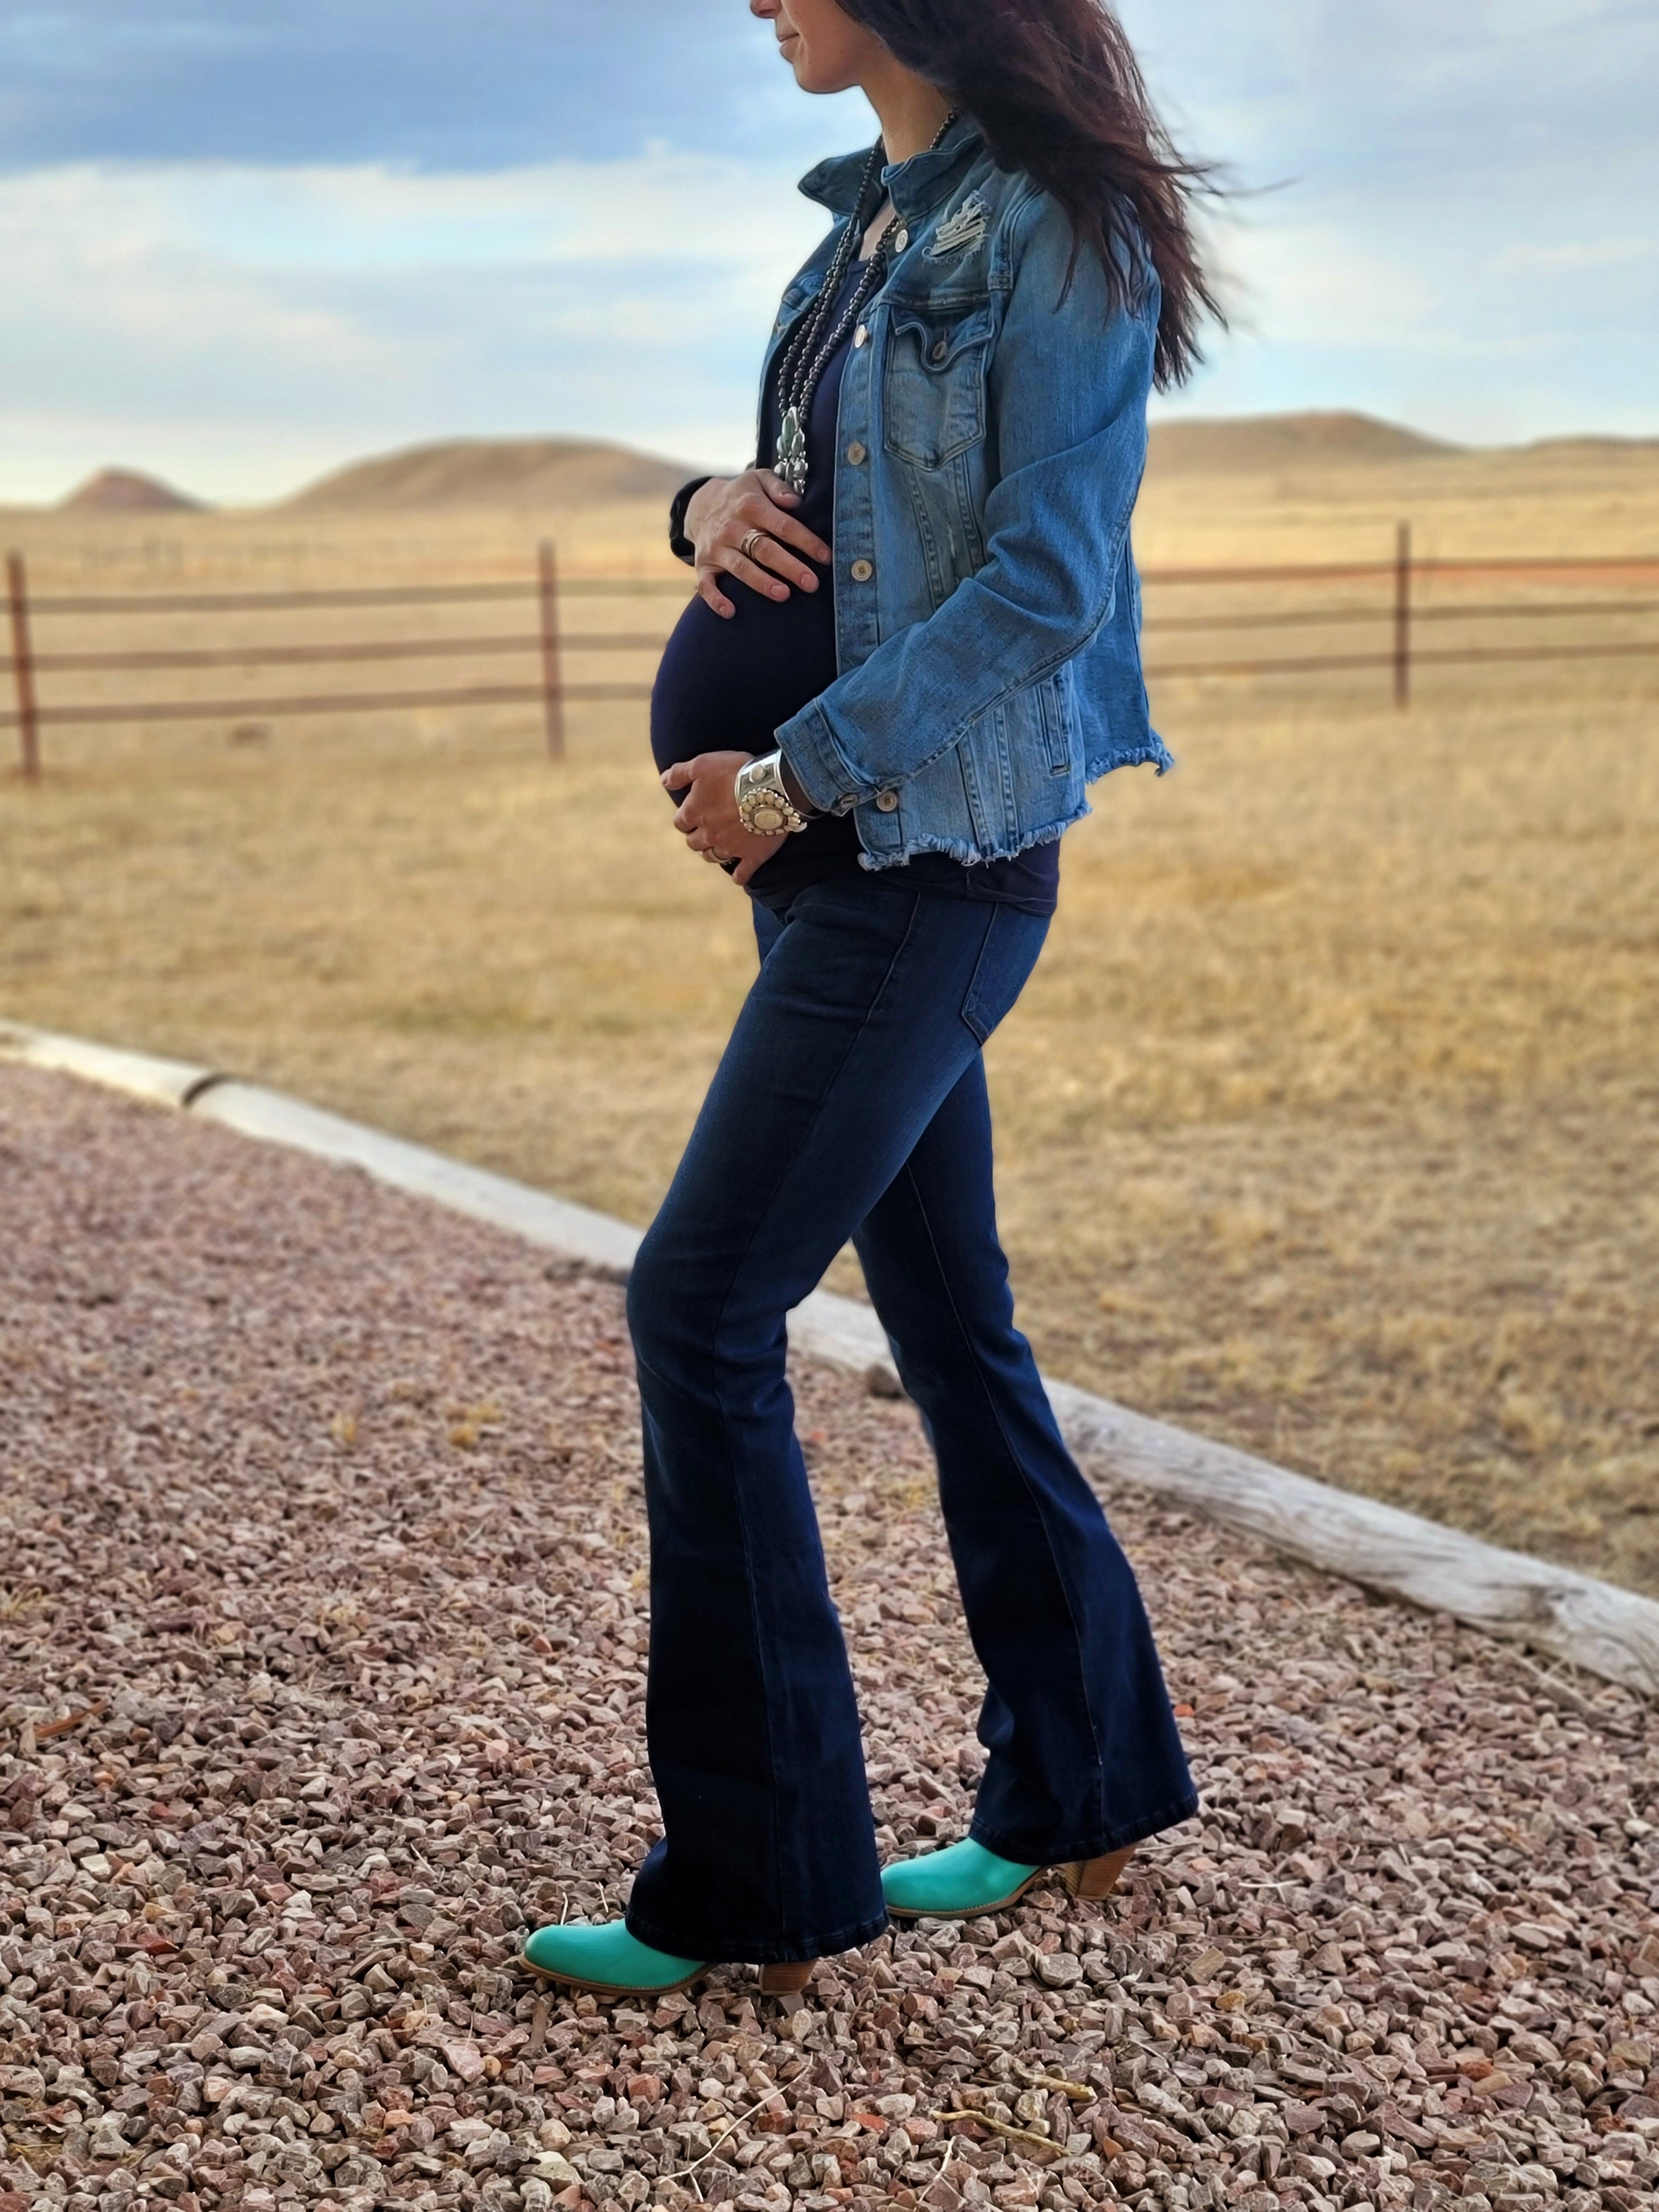 Maternity Flare Jeans